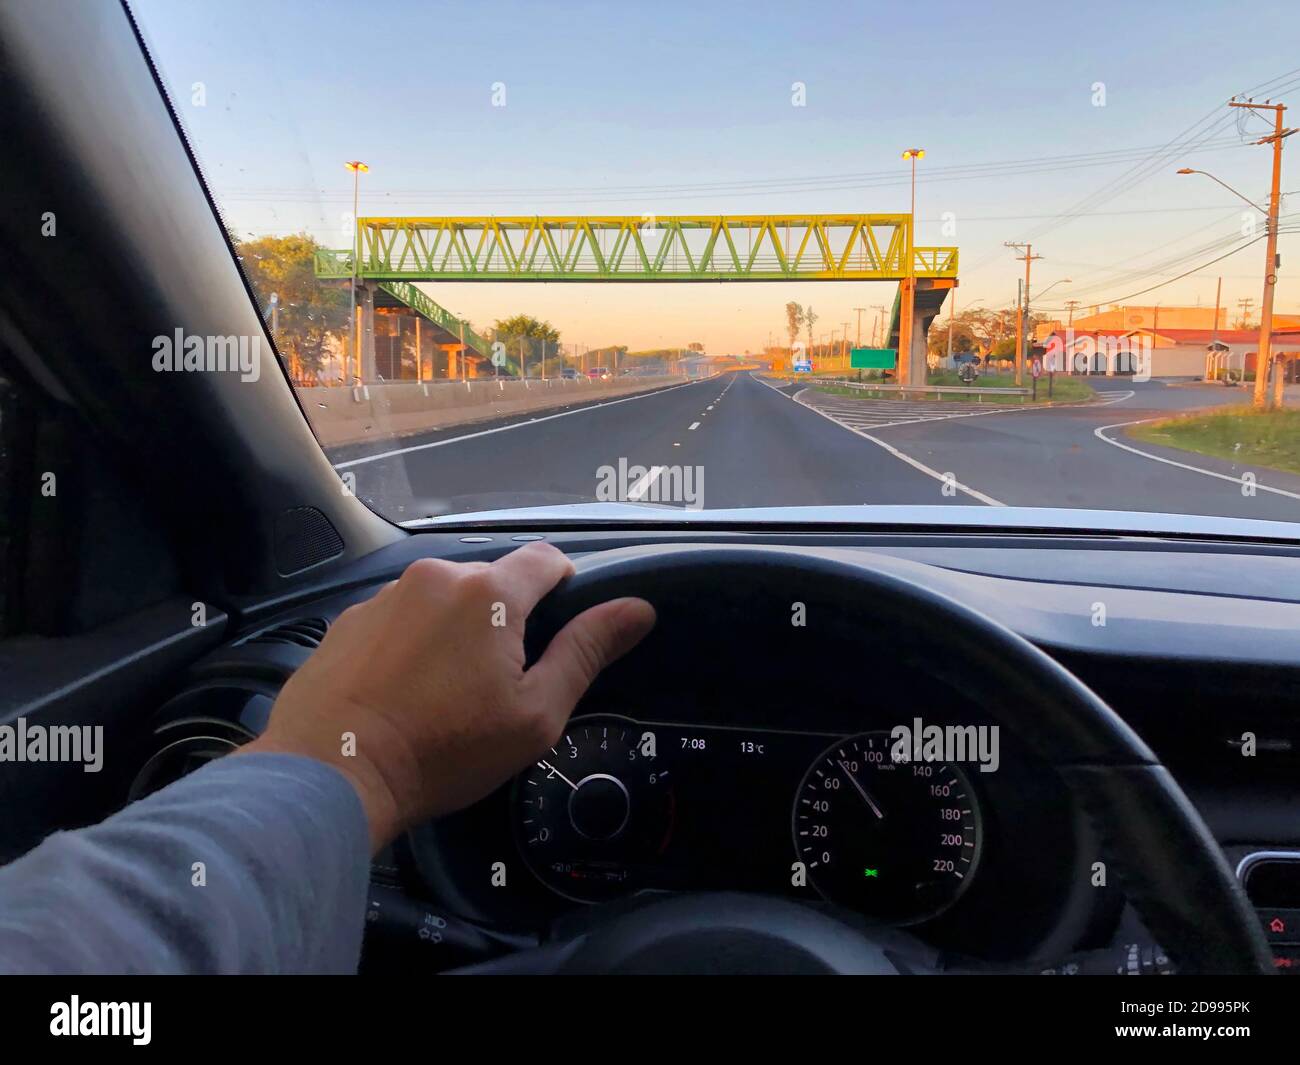 A driver's point of view at sunrise, on a motorway with a pedestrian walkway. Stock Photo